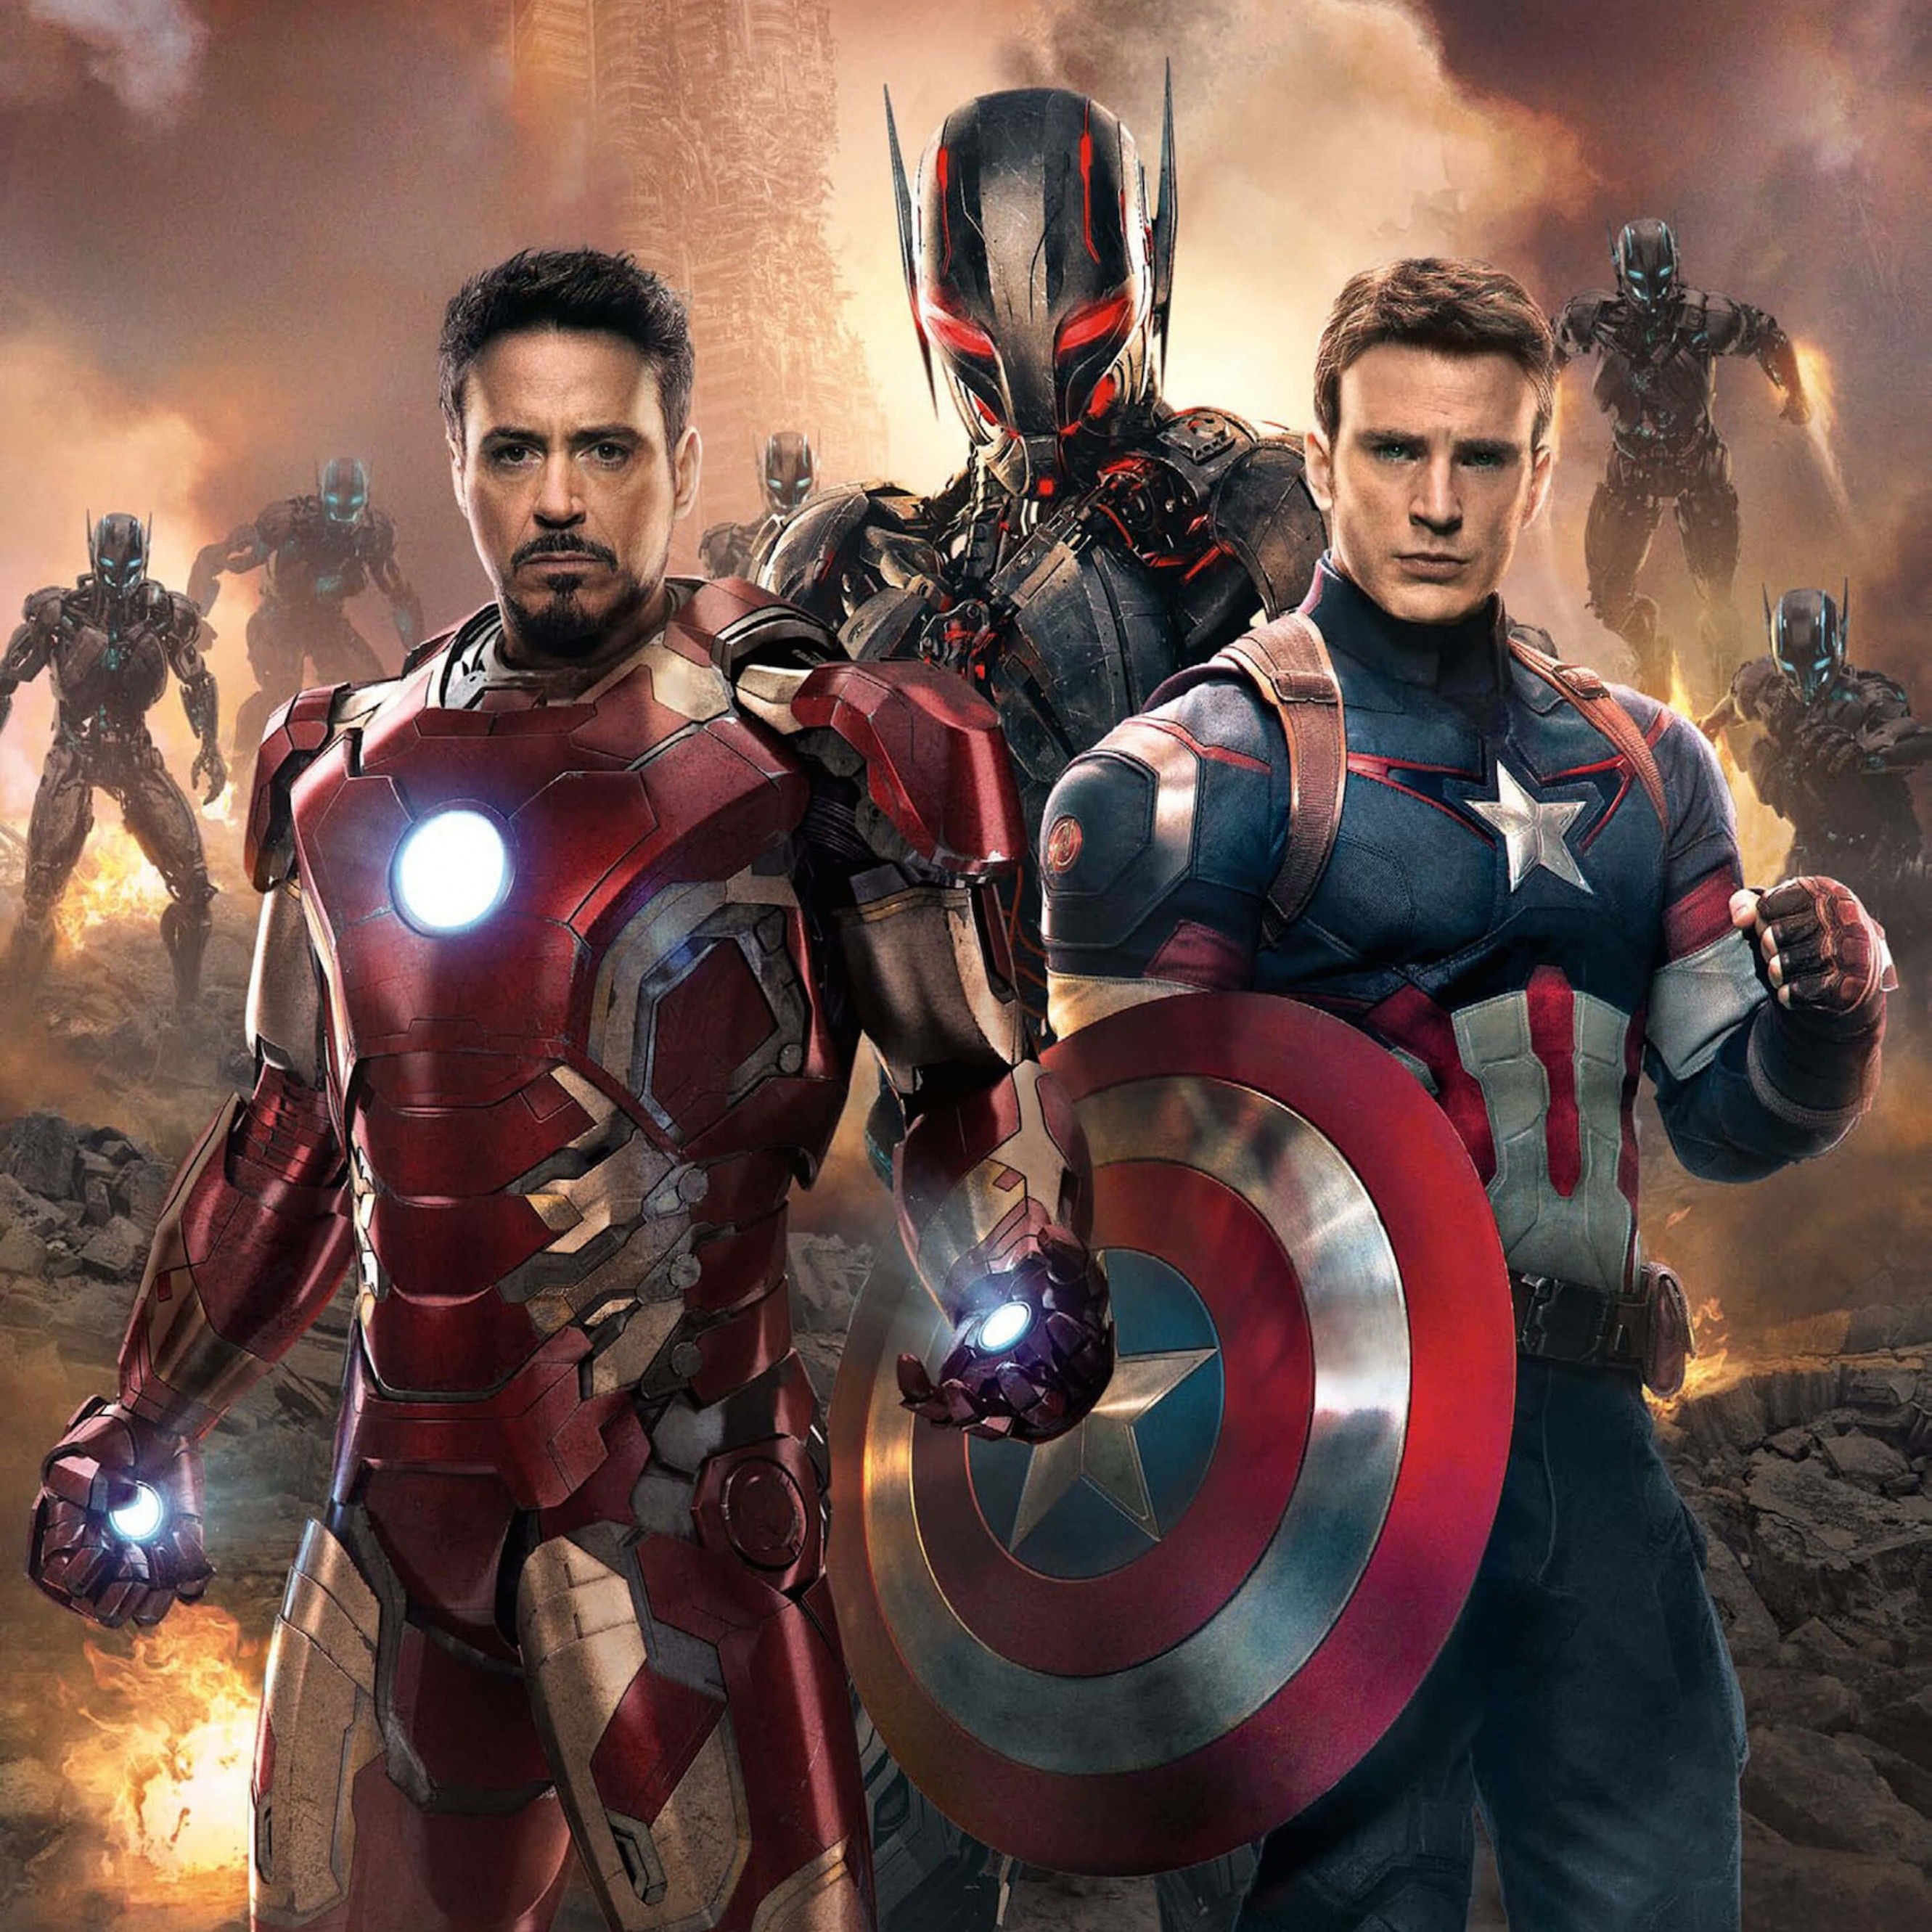 The Avengers: Age of Ultron - Iron Man and Captain America Wallpaper for Apple iPhone 6 Plus